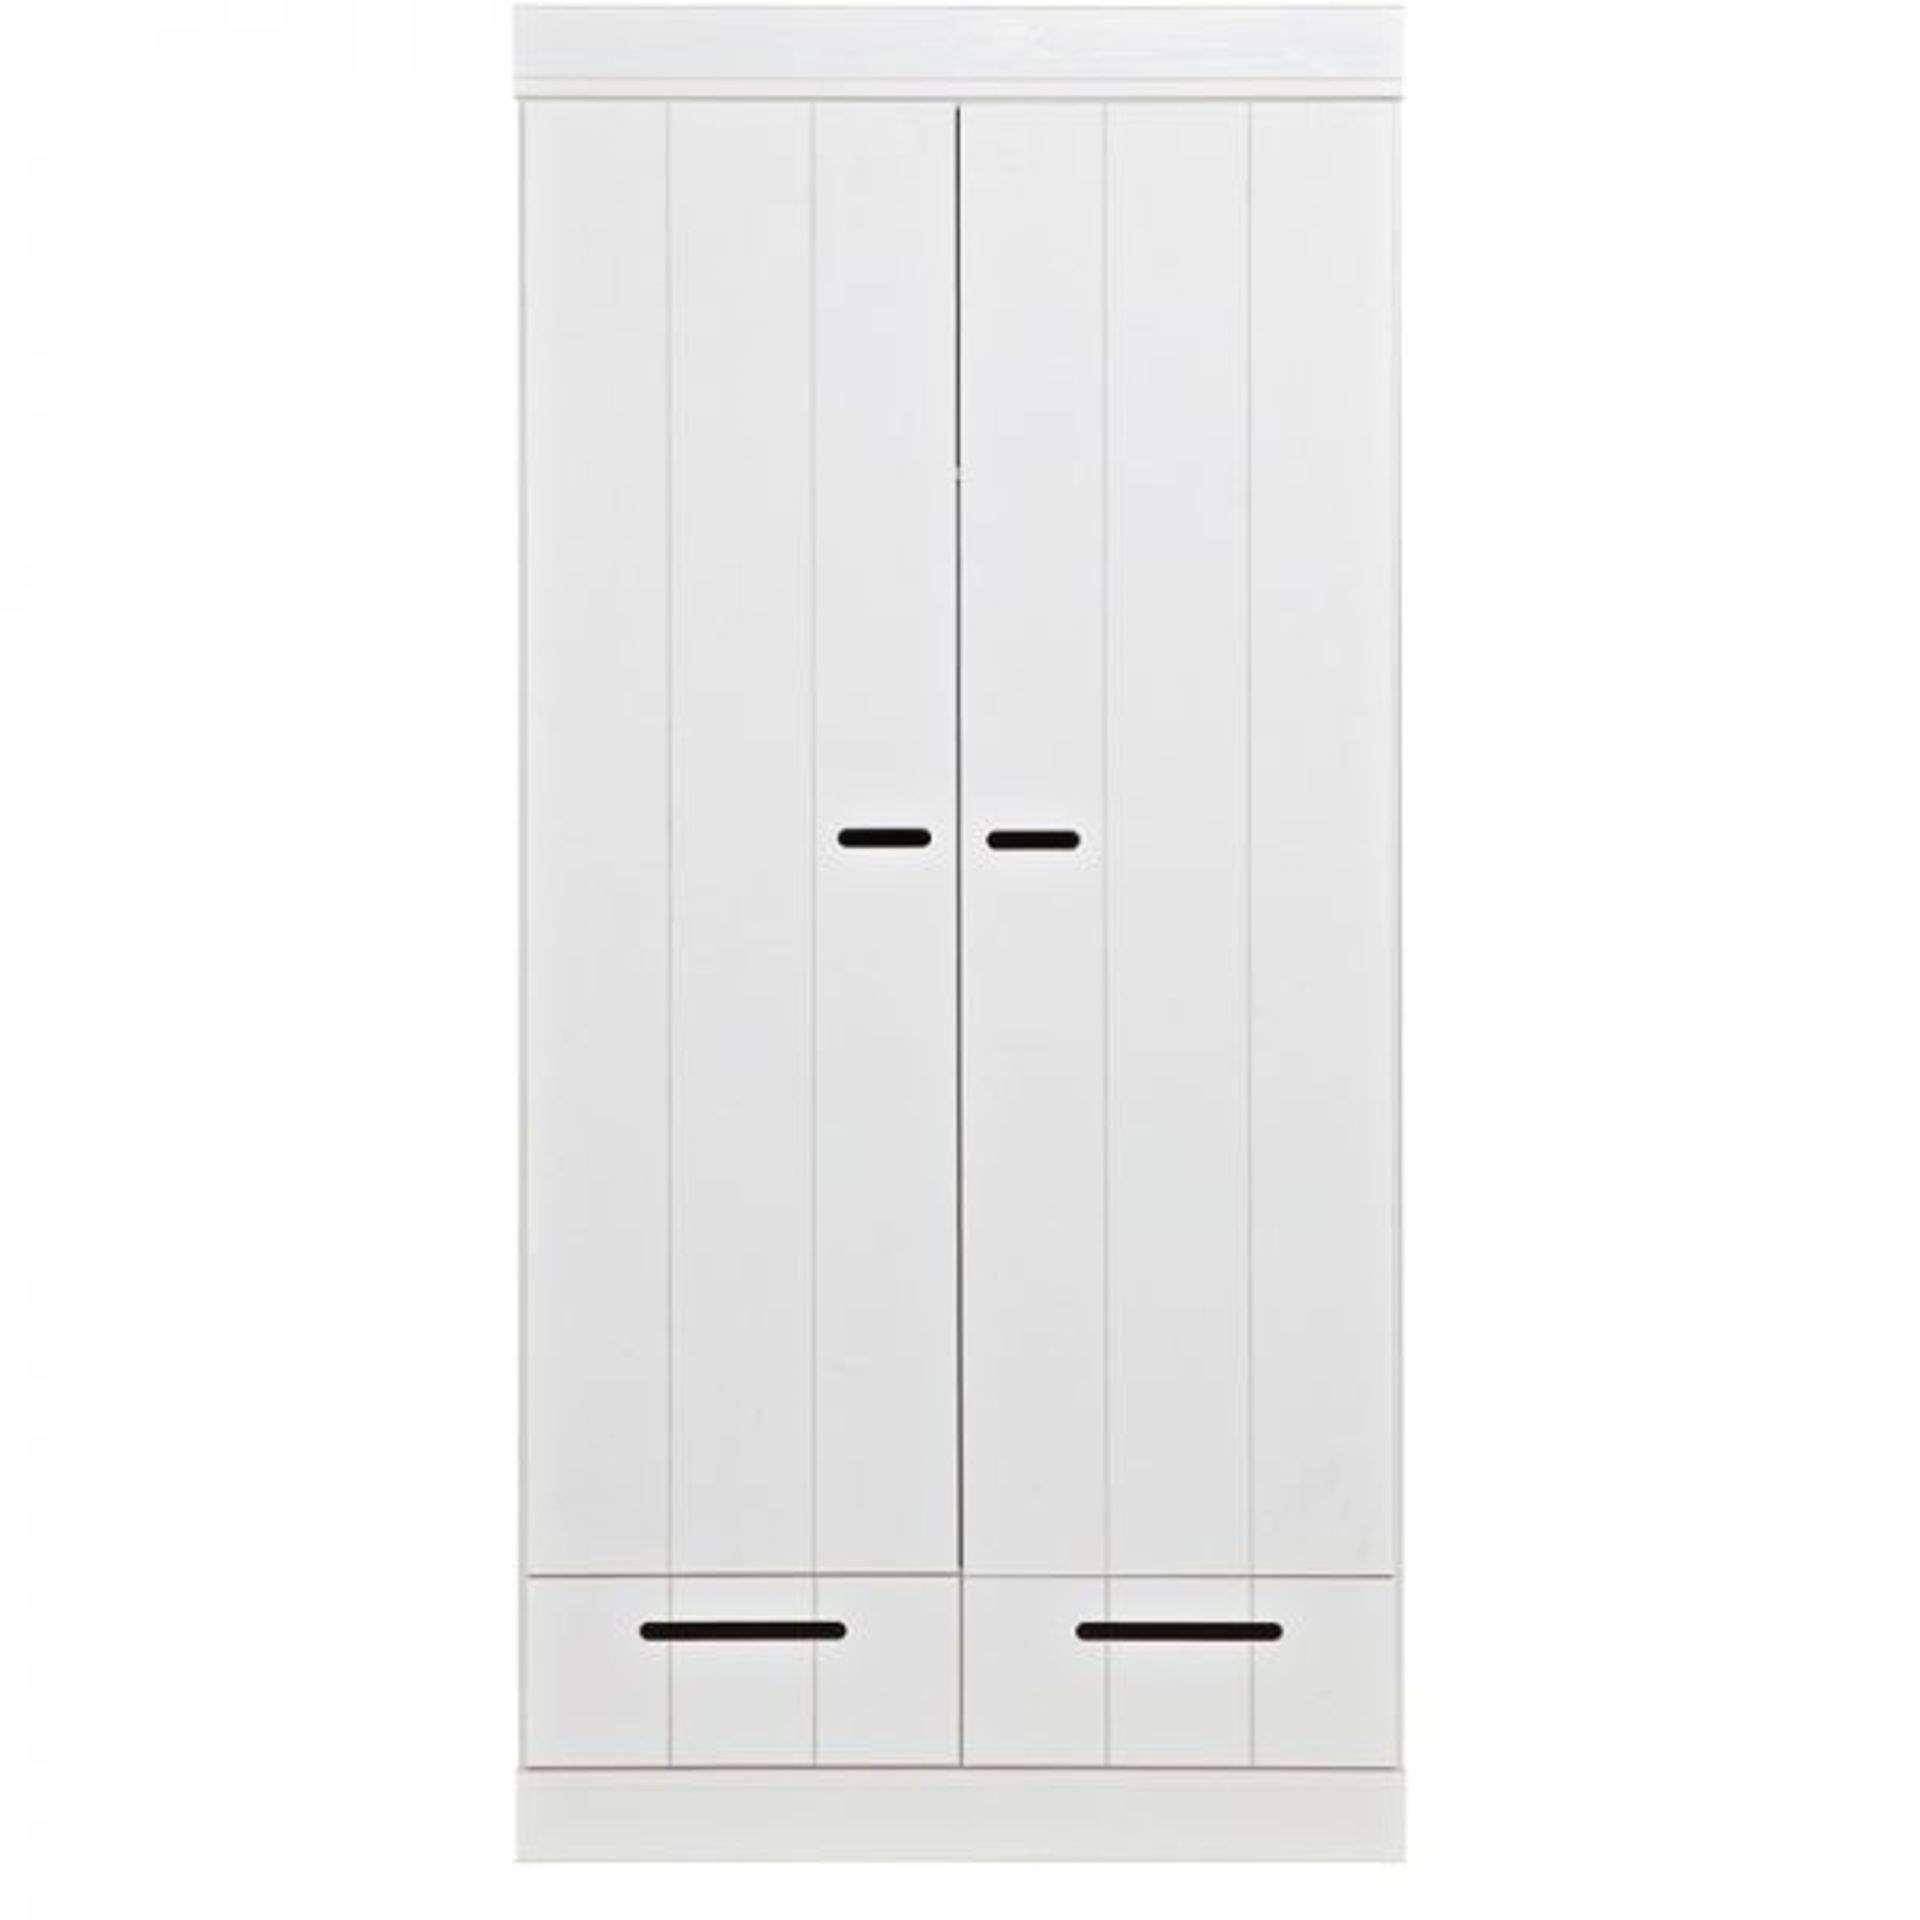 1 x WOOOD Designs 'Connect' Solid Wood Scandinavian Style 2-Door 2 Drawer Wardrobe In WHITE - Boxed - Image 5 of 8